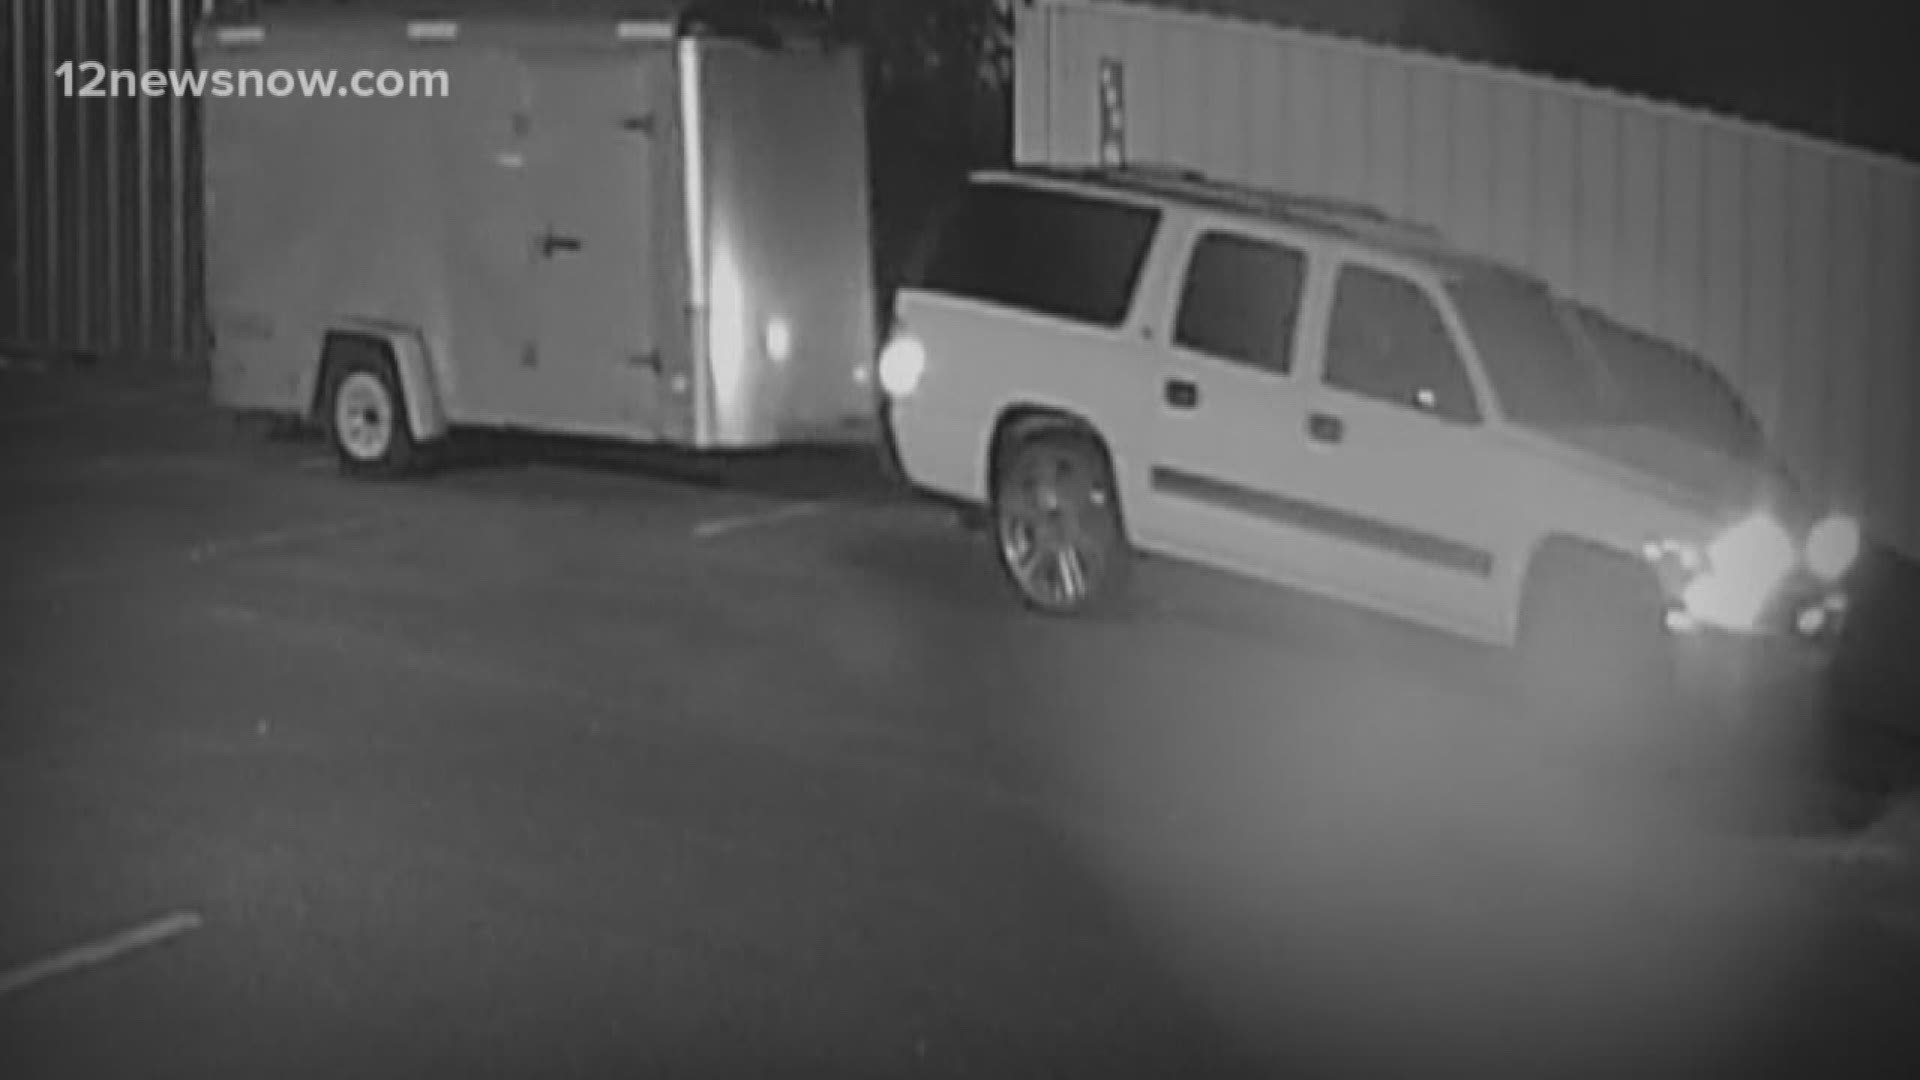 Thieves caught on camera stealing thousands worth of diapers from Beaumont non-profit